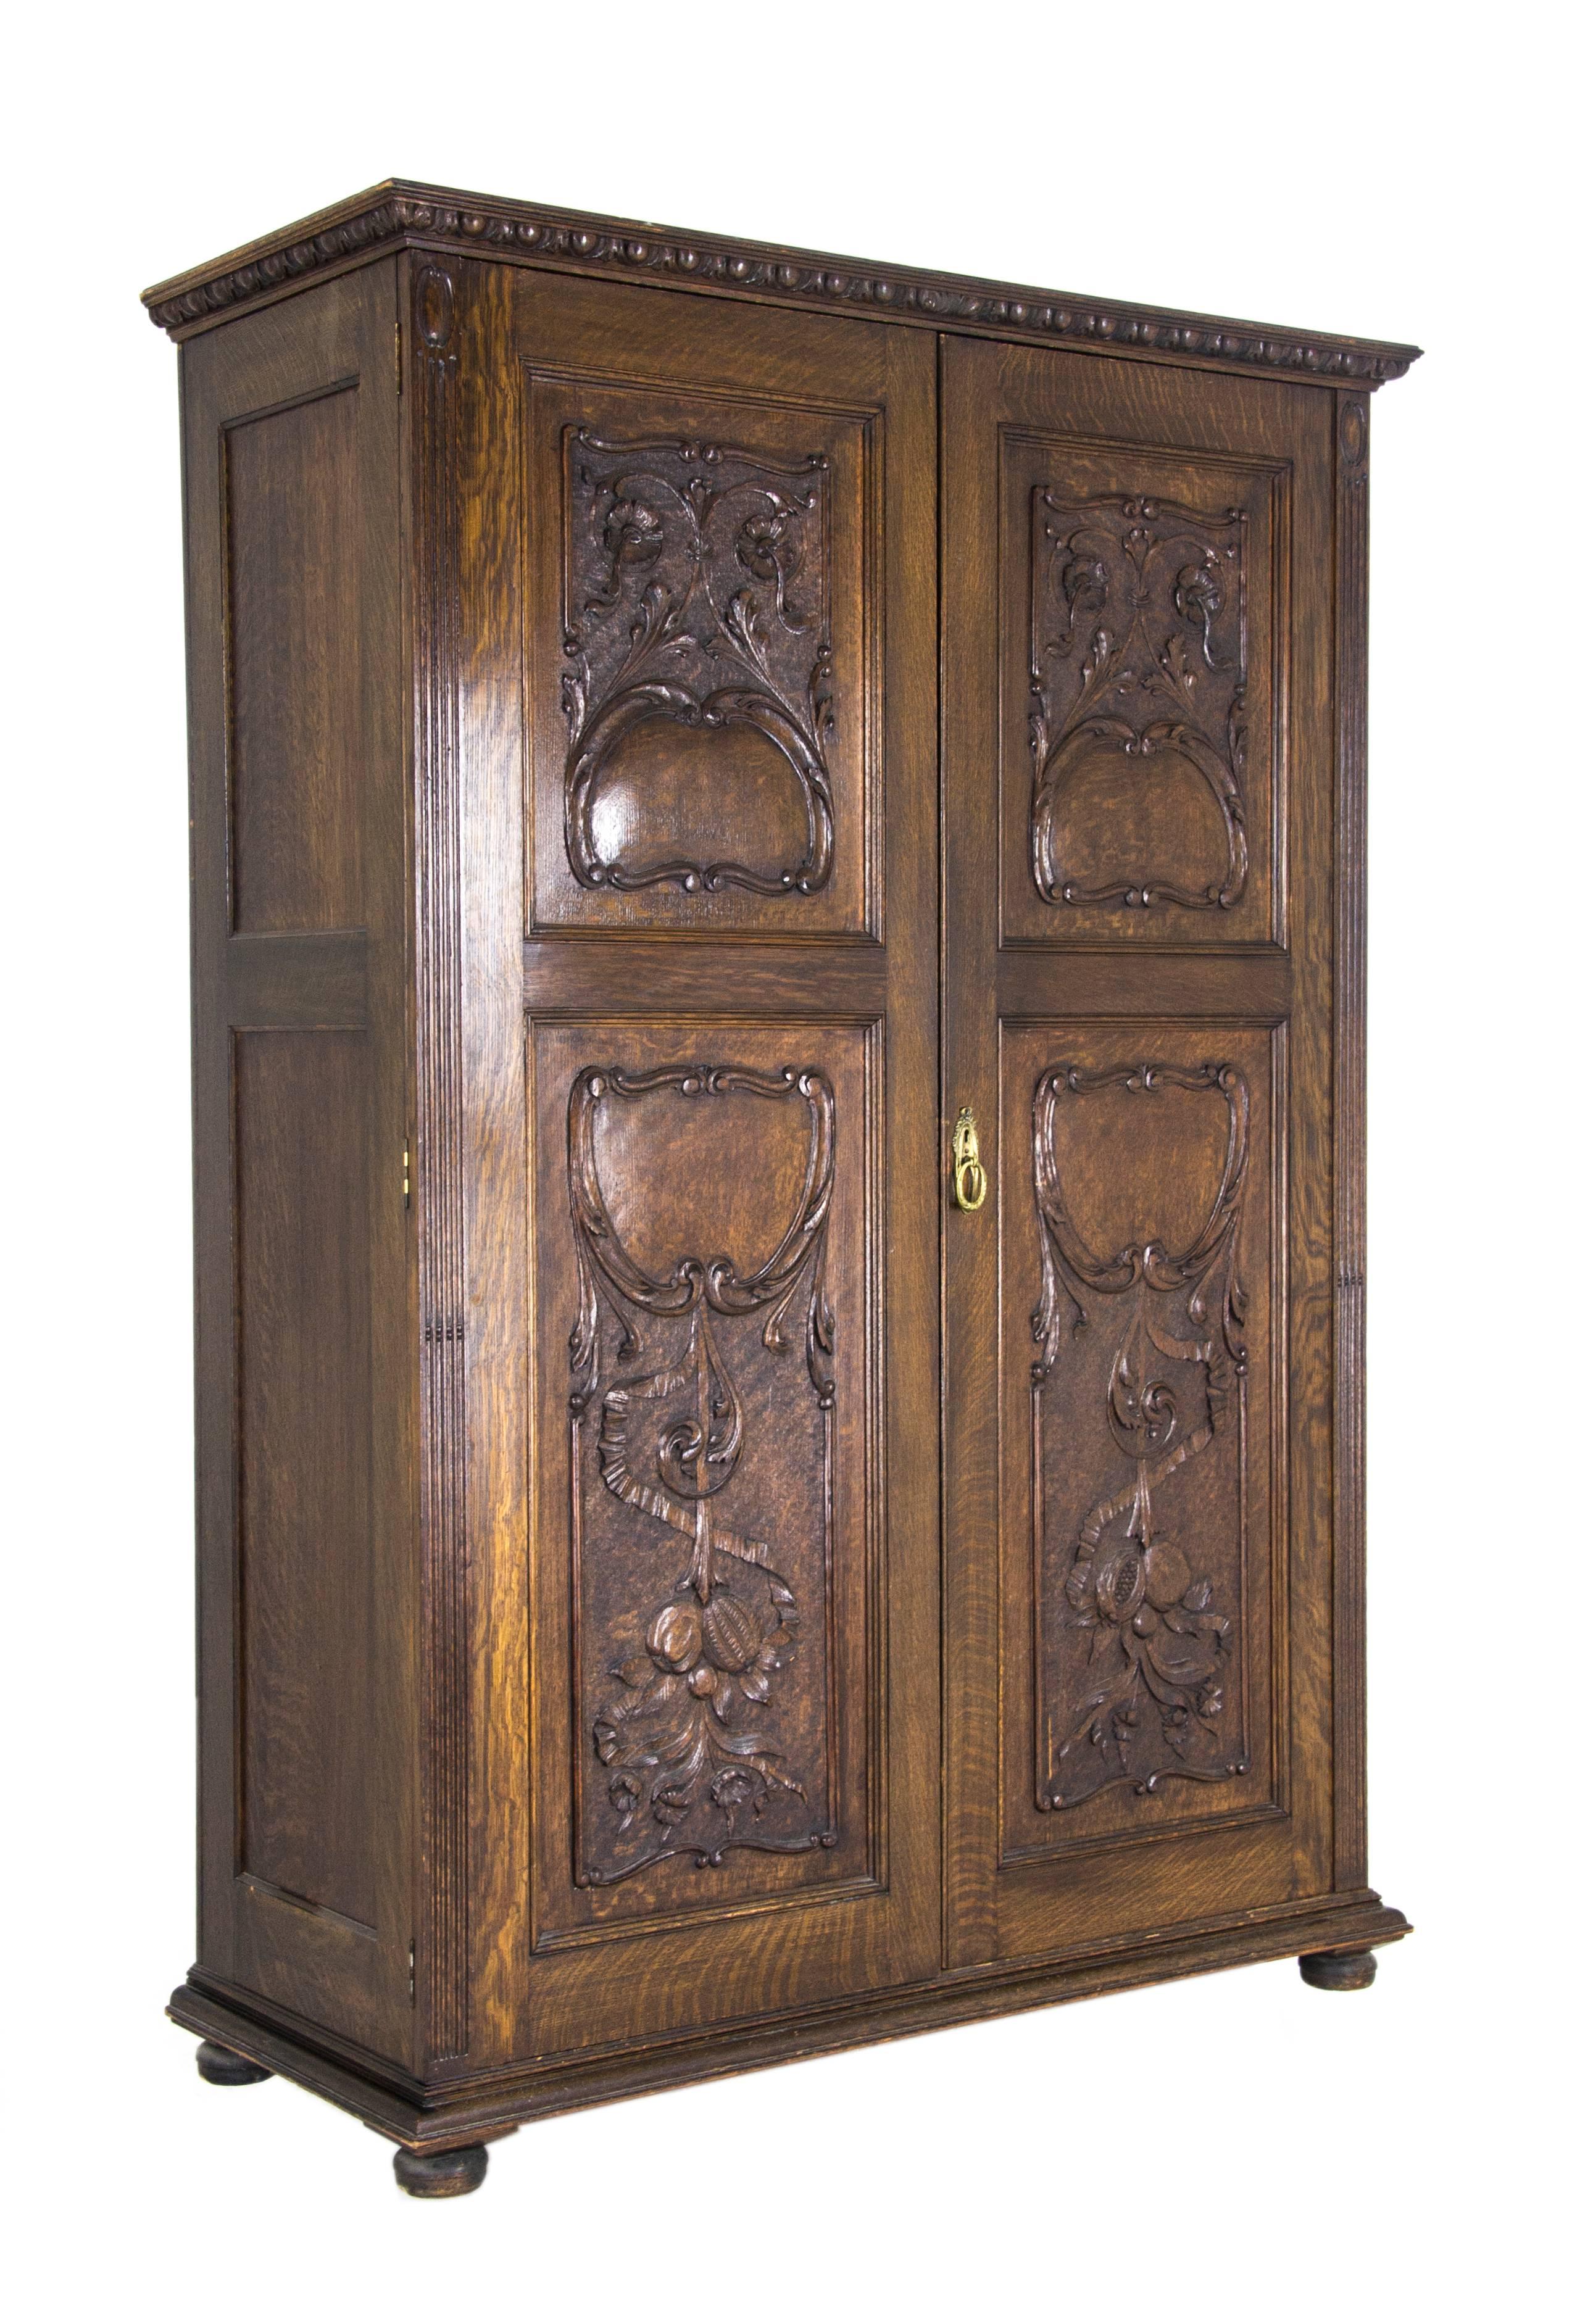 Antique armoire heavily carved tiger oak Scotland, 1890

Scotland, 1890
Solid oak construction
Carved cornice above
Original finish
Two carved raised panelled doors
Two carved panels in each door
Superb deep carving
Lock in working order